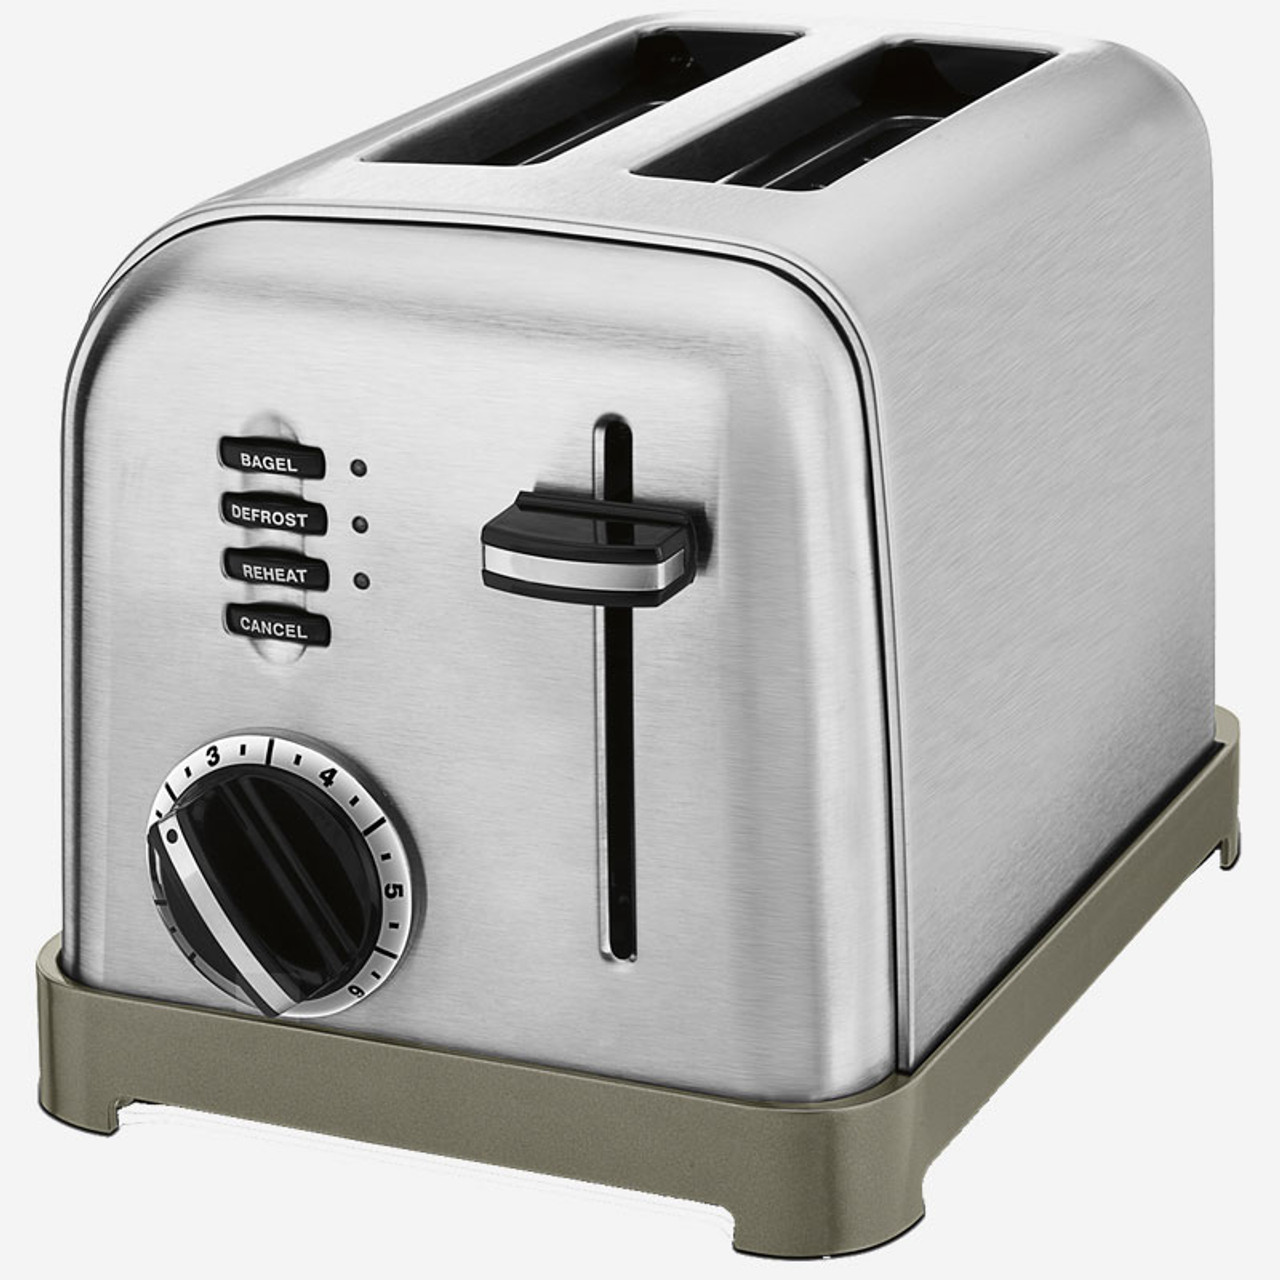 Cuisinart 4 Slice Digital Toaster w/ MemorySet Feature - Stainless Steel -  CPT-740